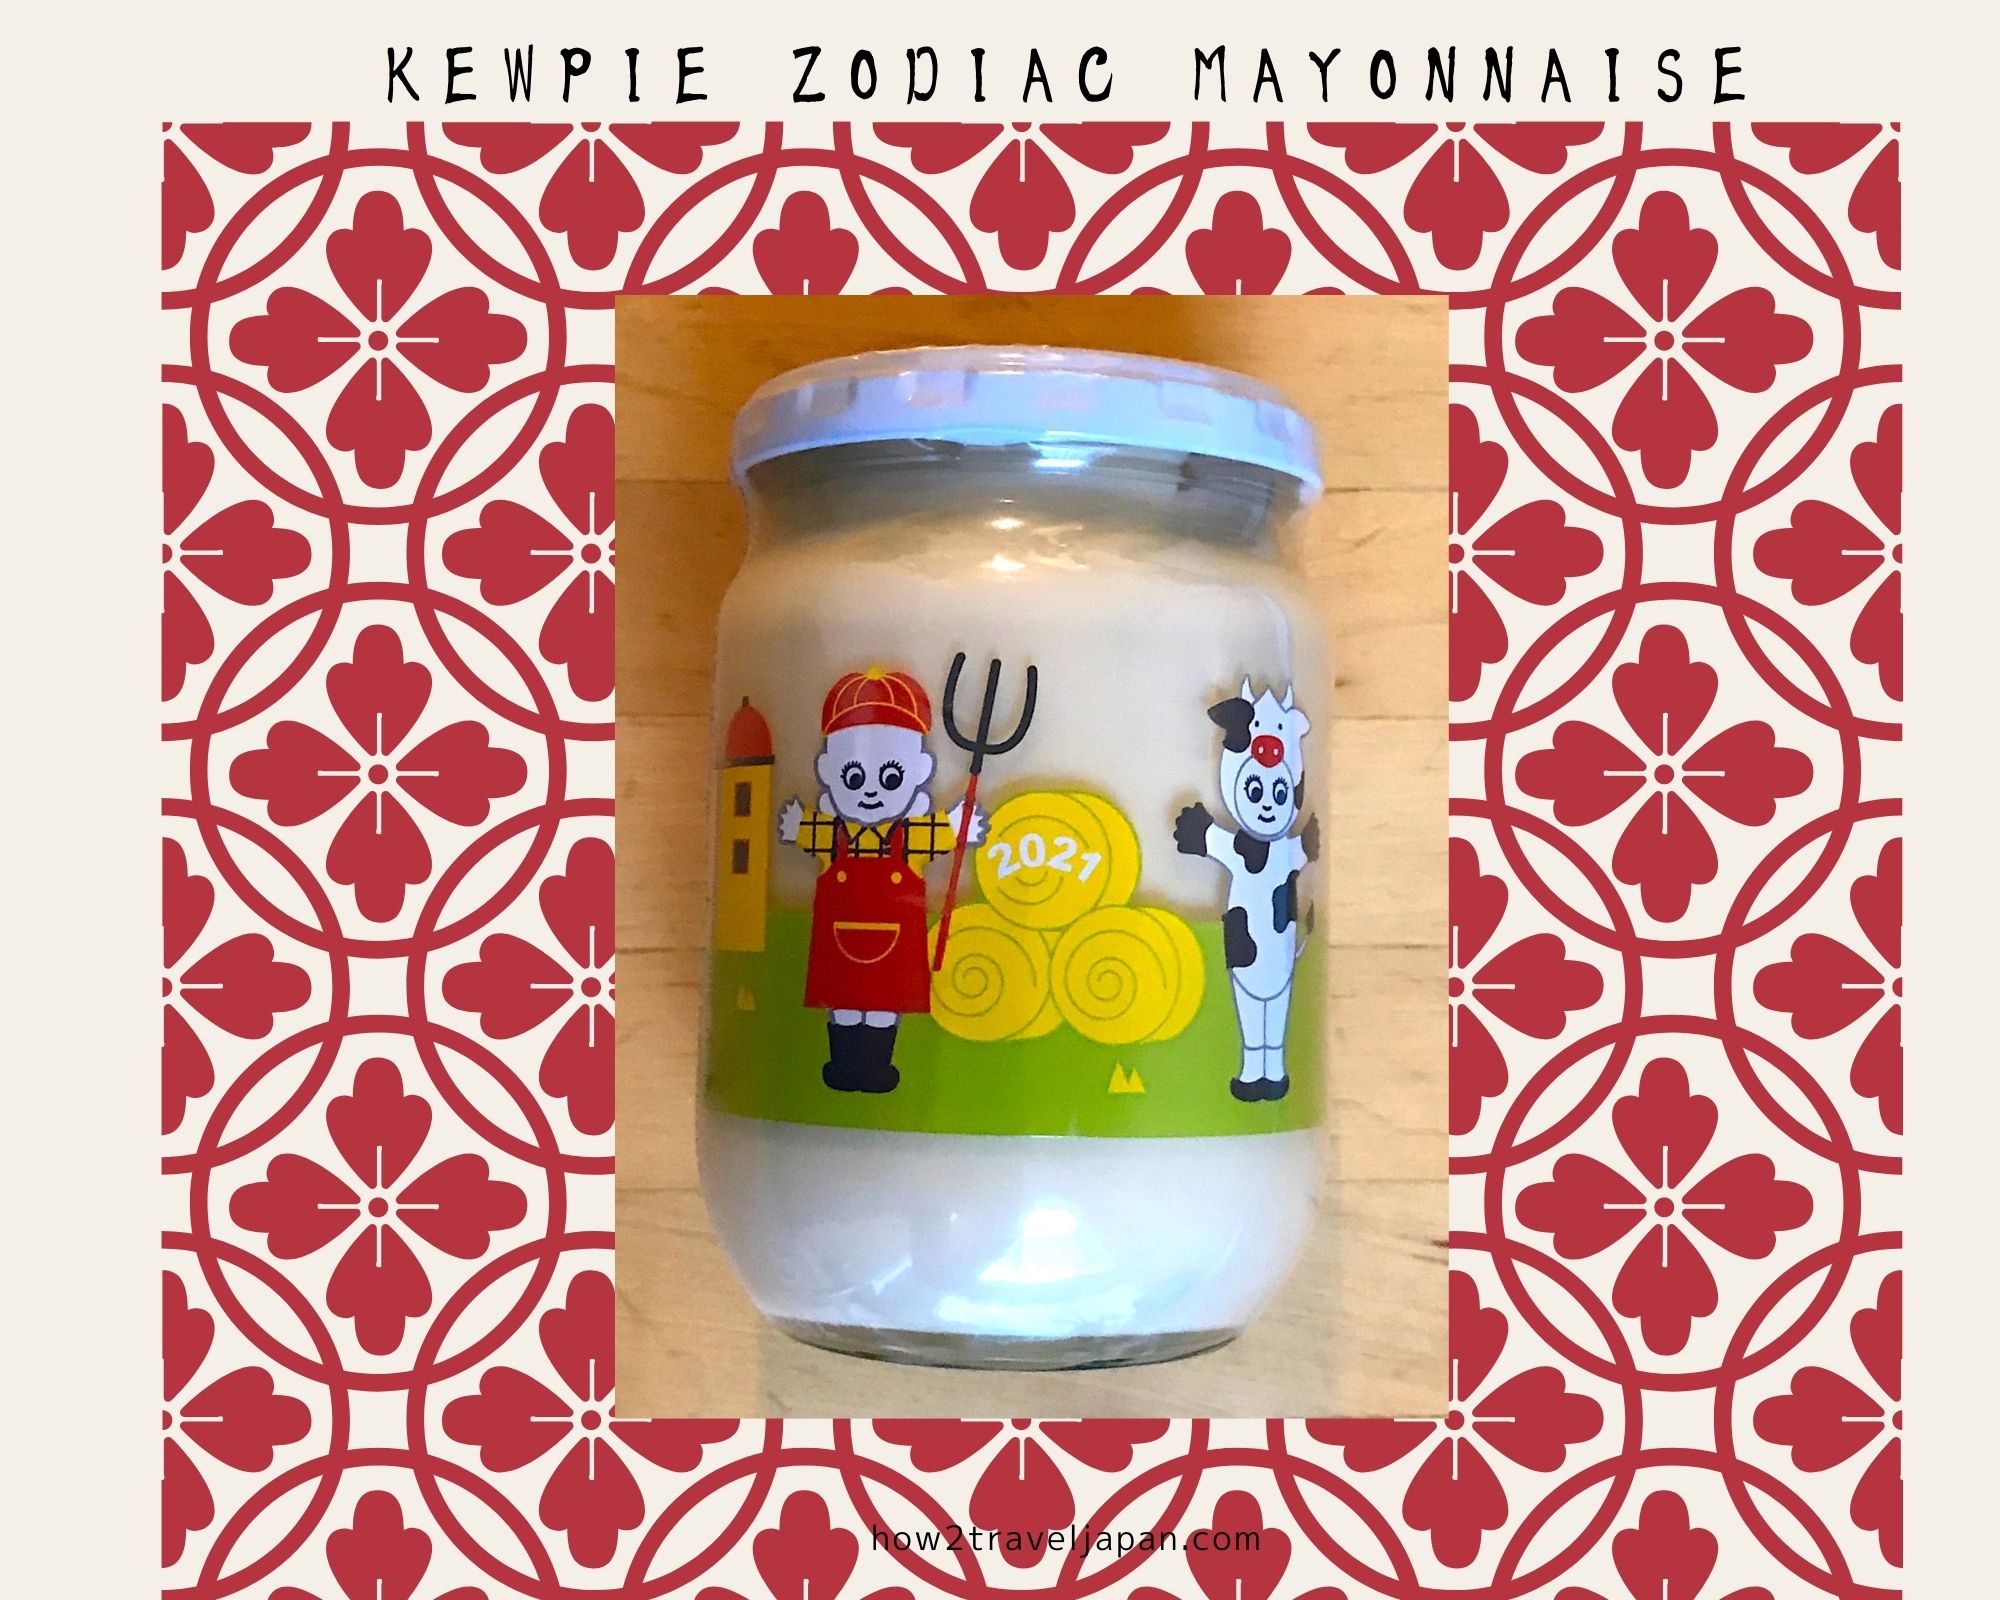 You are currently viewing Kewpie zodiac mayonnaise 2021